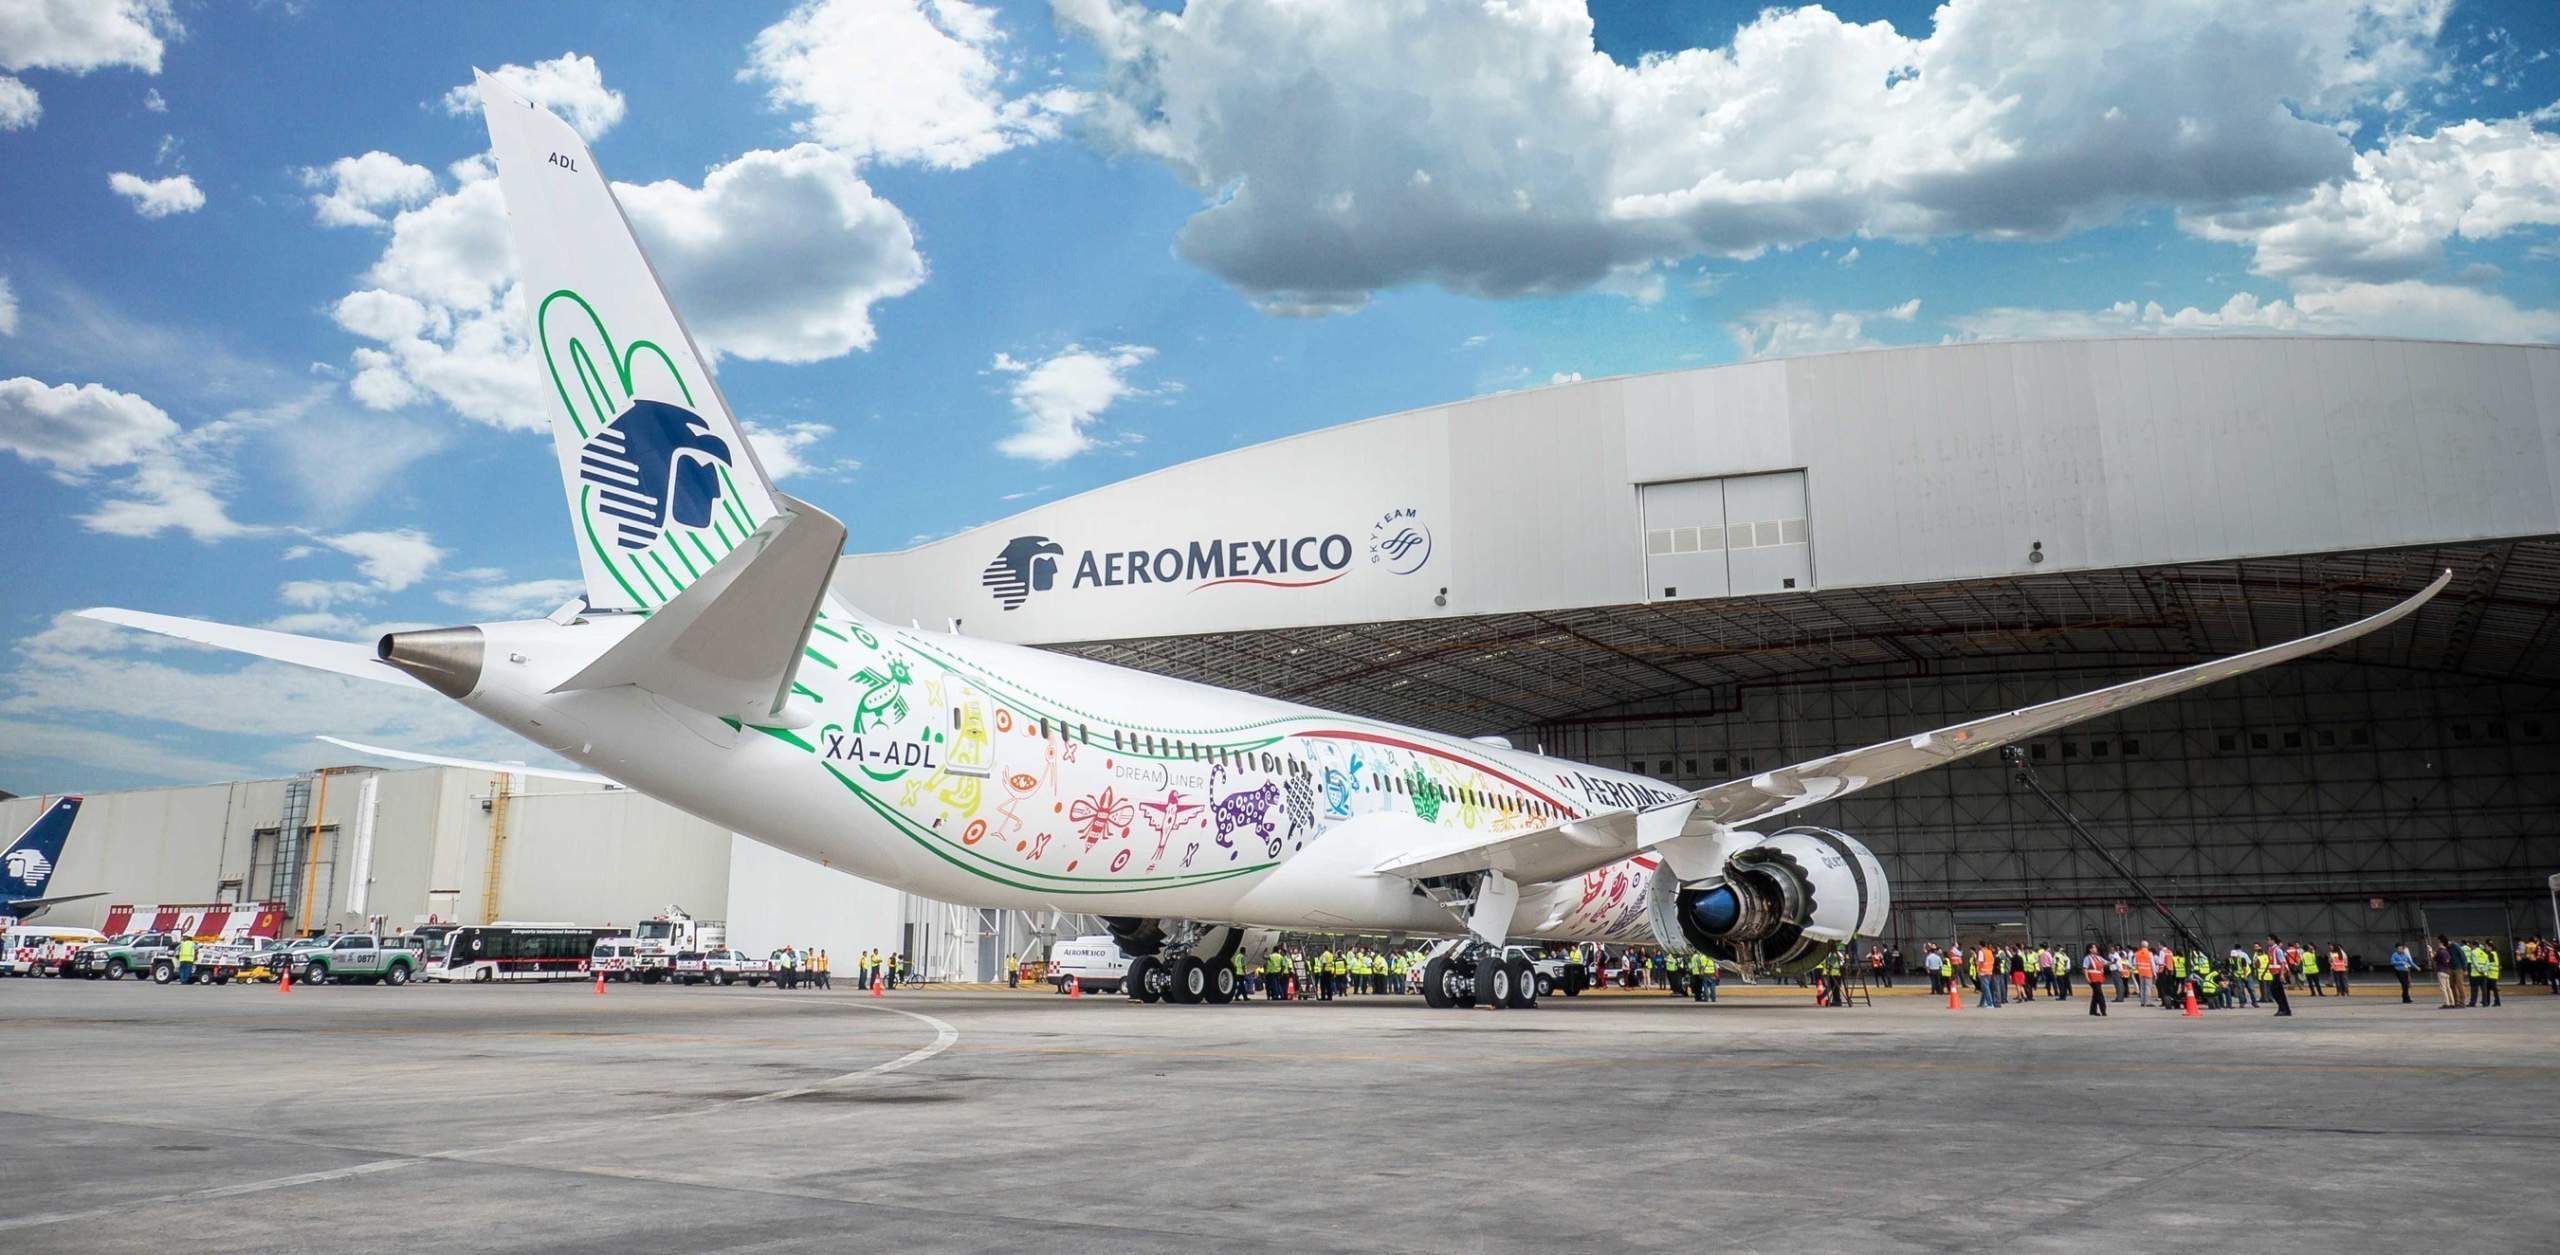 Aeromexico has not been able to use its new aircraft in the U.S.